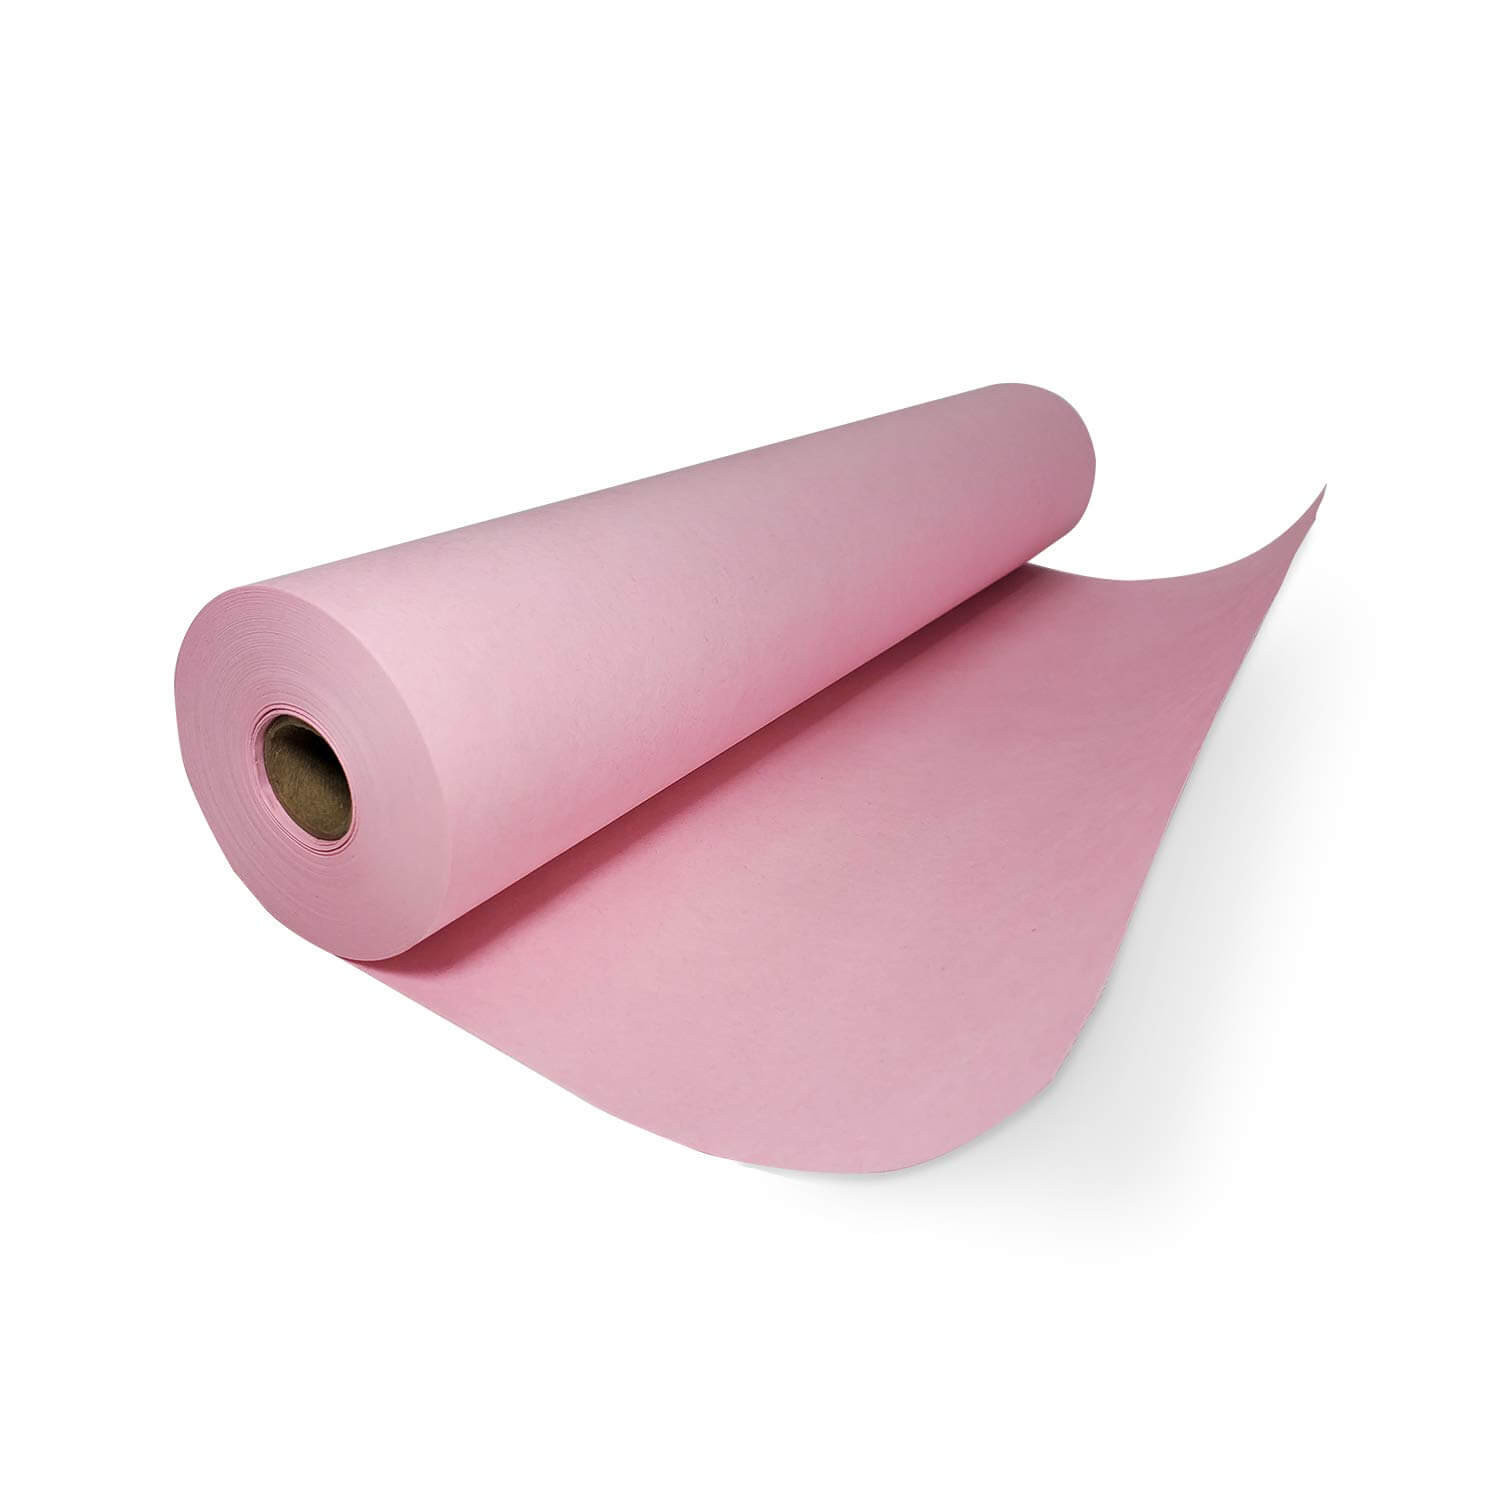 18 x 180 Pink Butcher Paper Roll for Cooking, Smoking and Packing Meat and  Fish buy in stock in U.S. in IDL Packaging